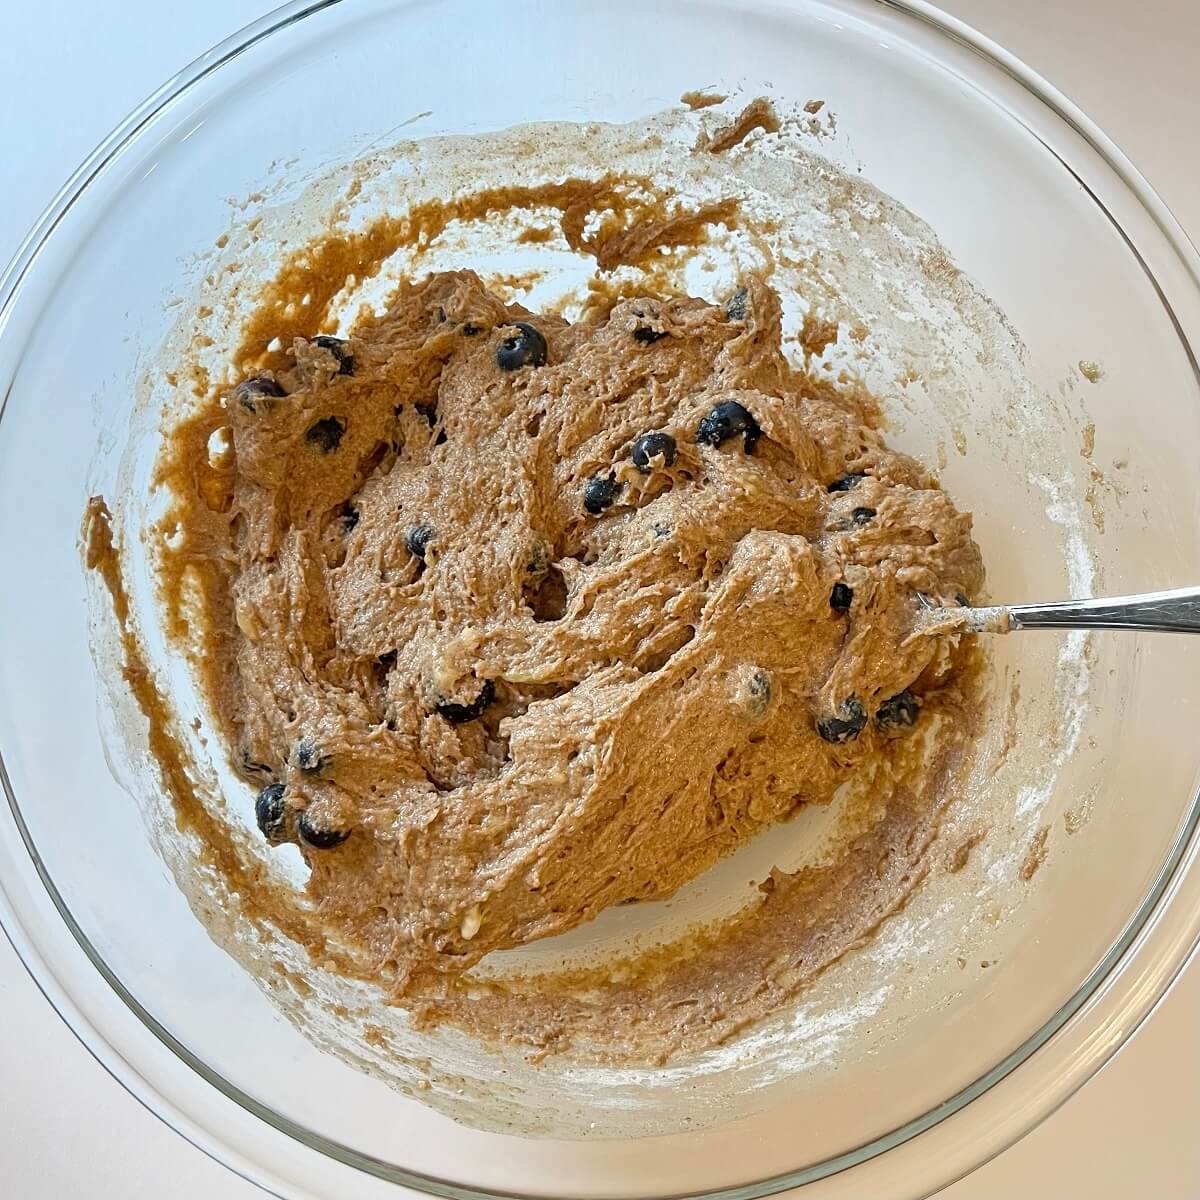 Blueberry muffin batter in a glass mixing bowl.